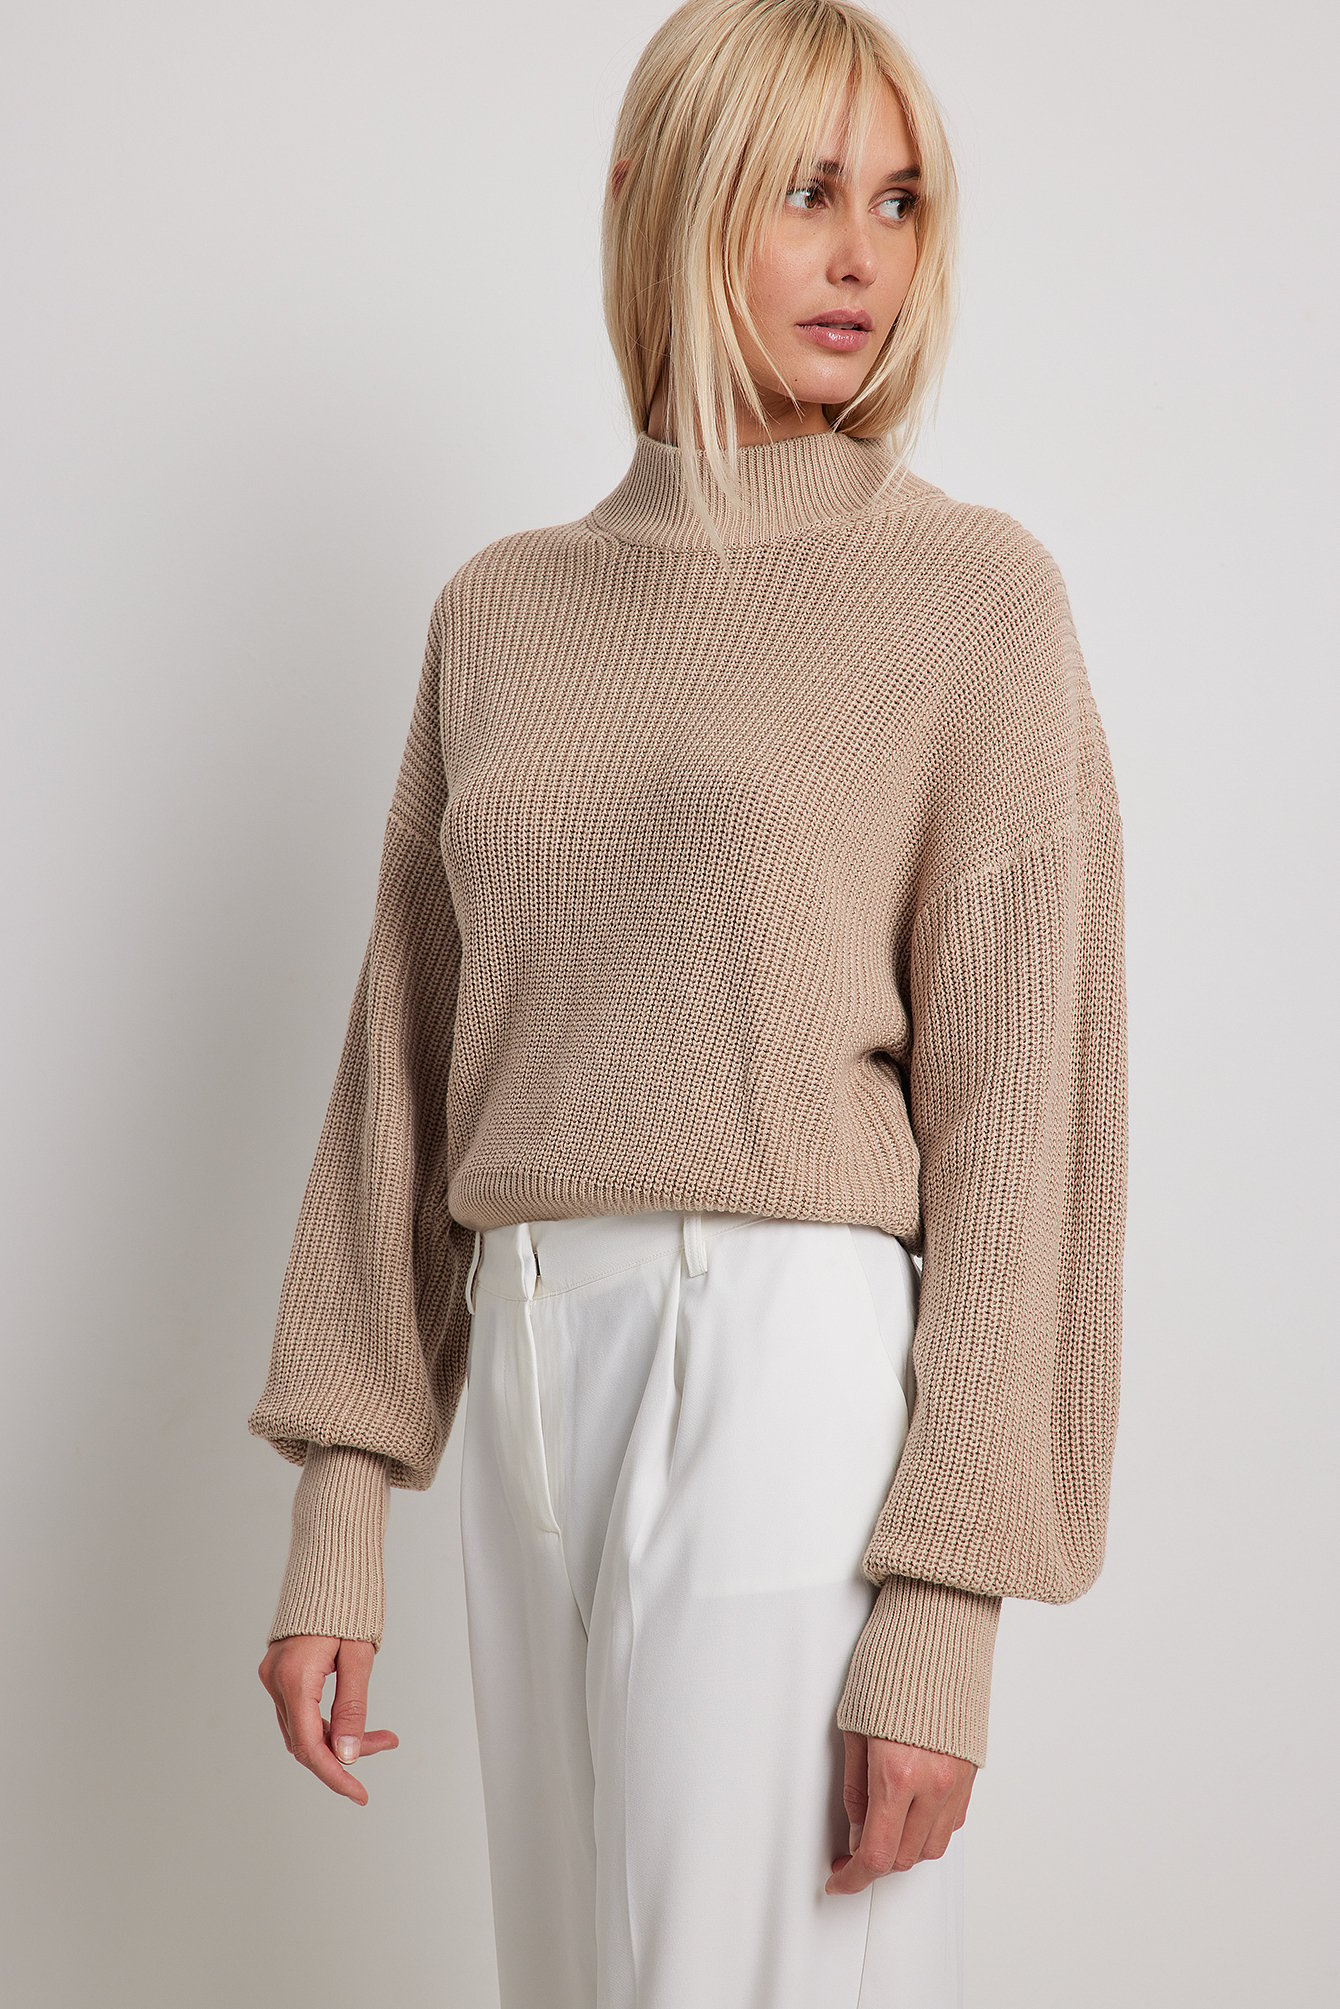 Beige Volume Sleeve High Neck Knitted Sweater